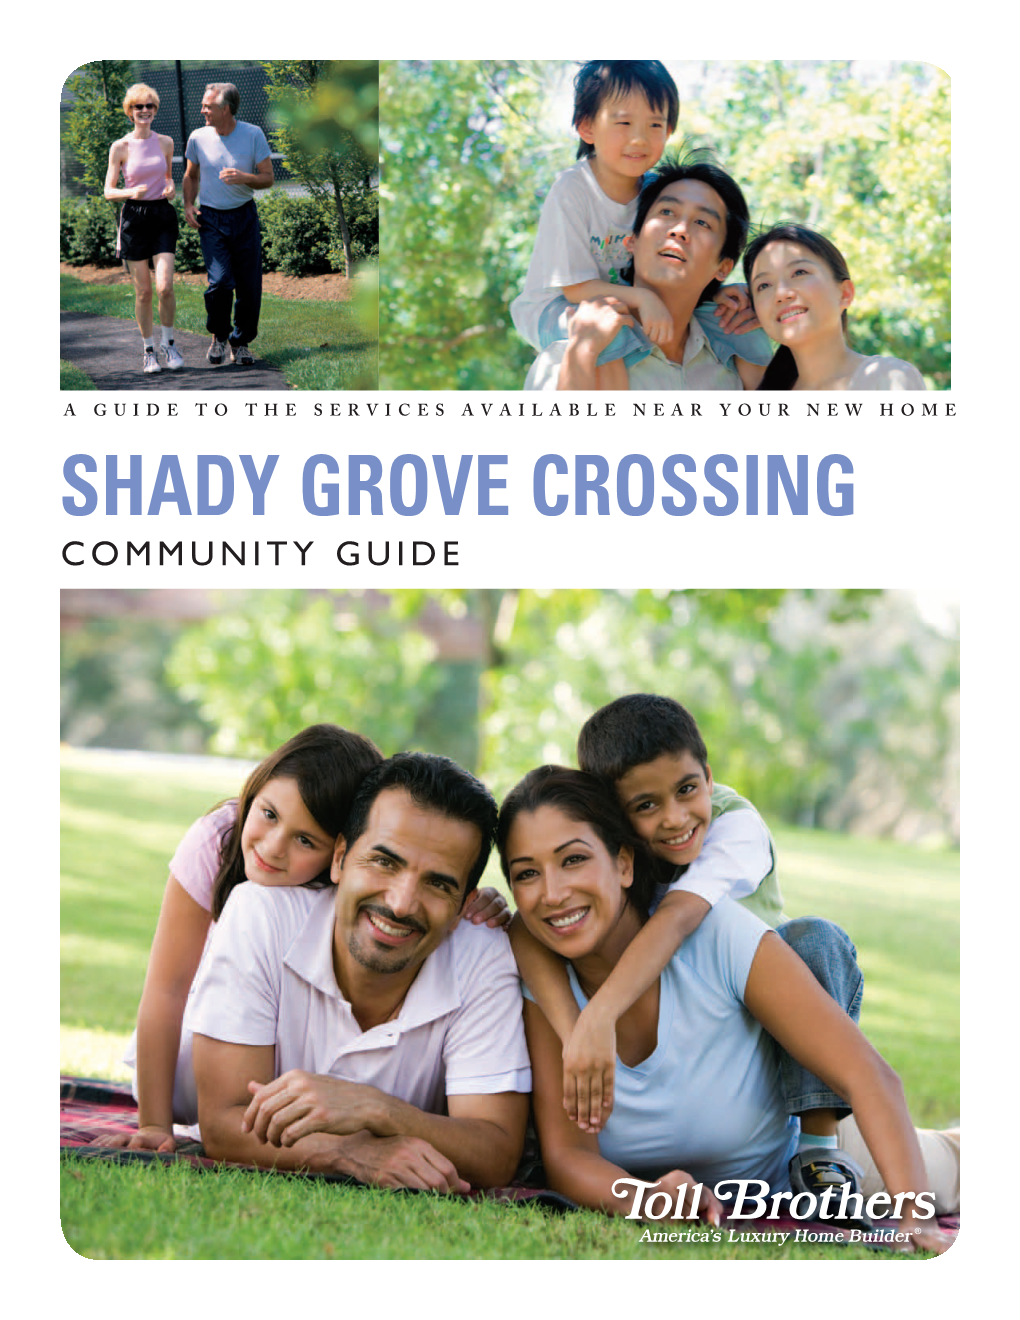 SHADY GROVE CROSSING COMMUNITY GUIDE Copyright 2011 Toll Brothers, Inc